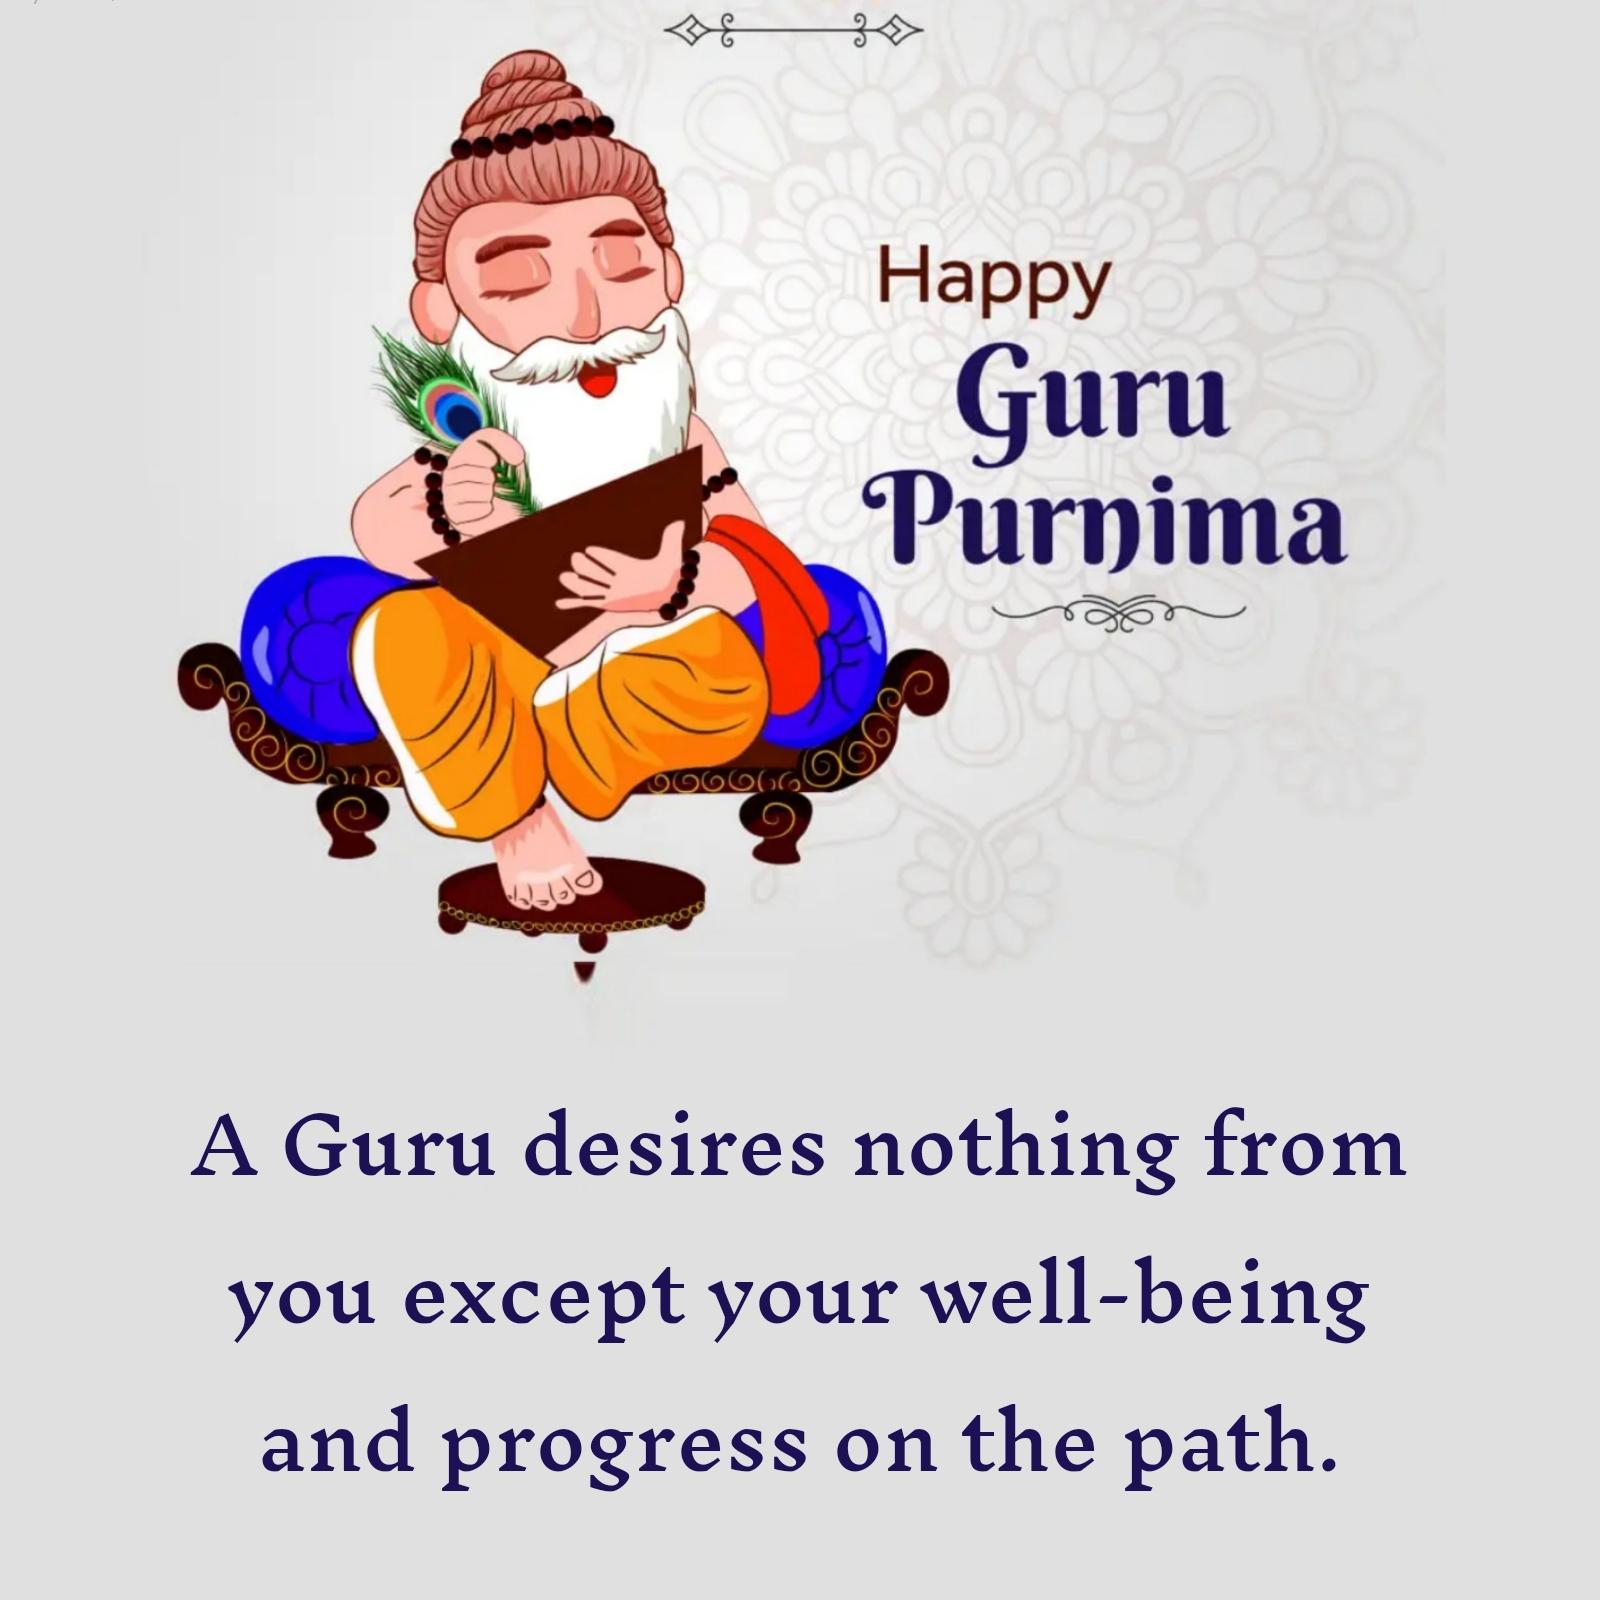 A Guru desires nothing from you except your well-being and progress on the path